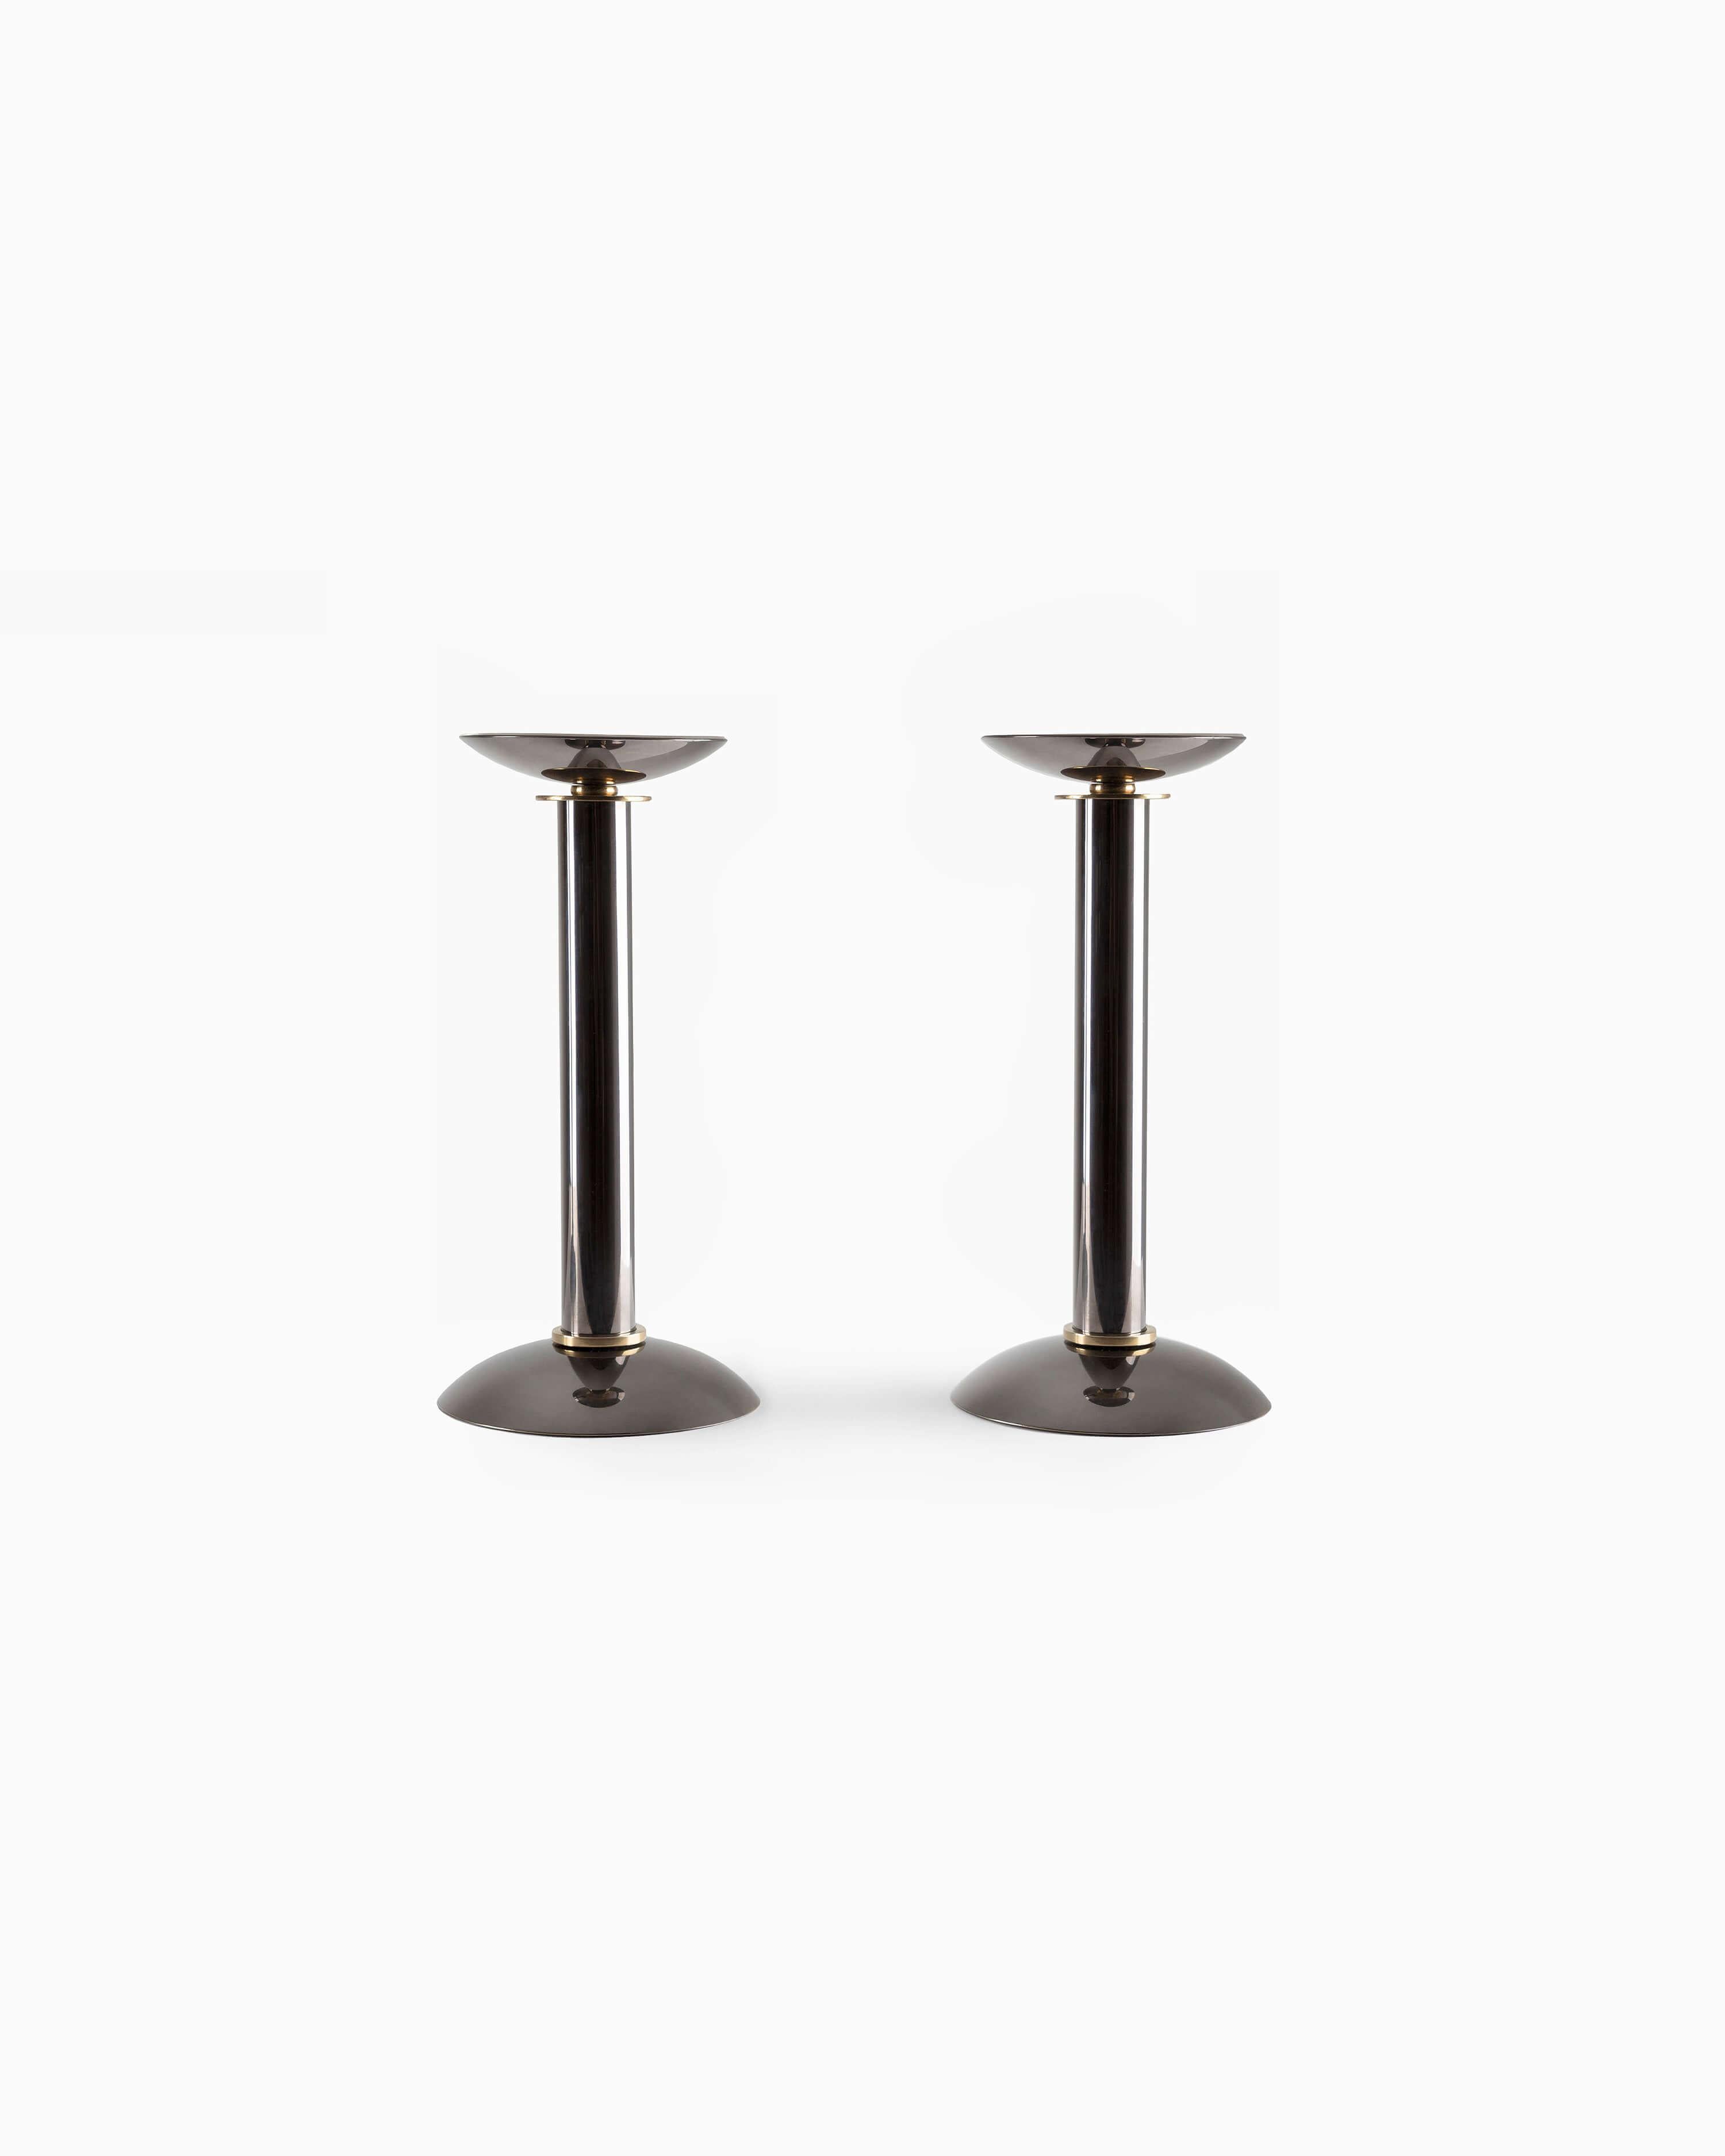 This pair of candleholders in gunmetal feature an ornately detailed brass stand, offering a perfect balance of both refinement and warmth to any table. Springer was a prevalent German-American designer who prioritized craftsmanship in his attention